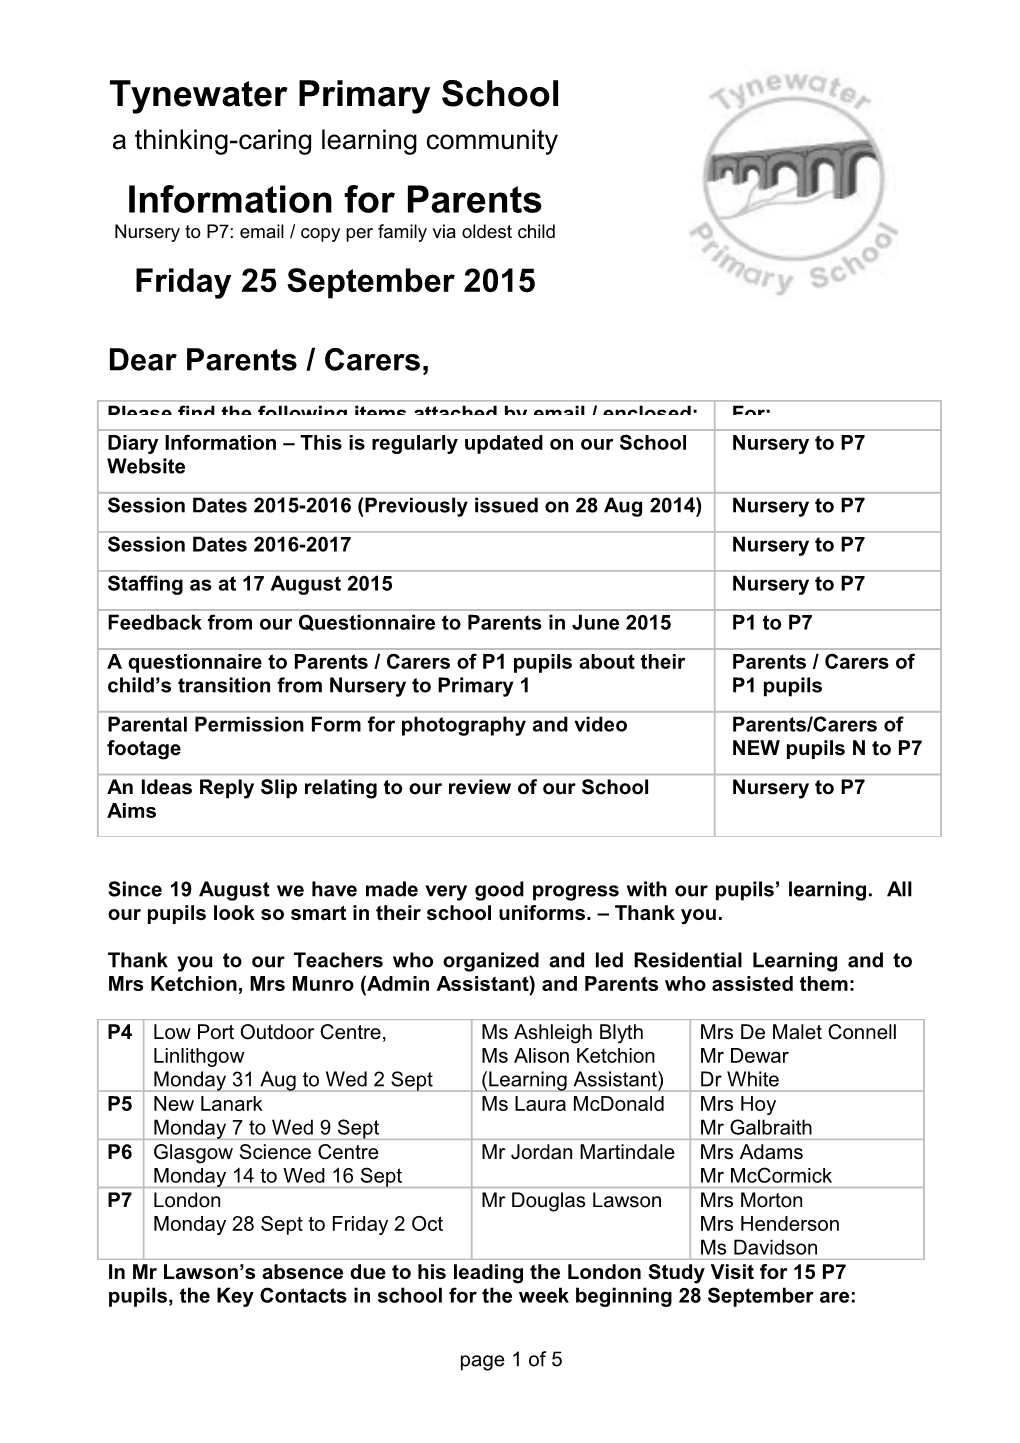 Please Find Enclosed Our Nursery to P7 Diary